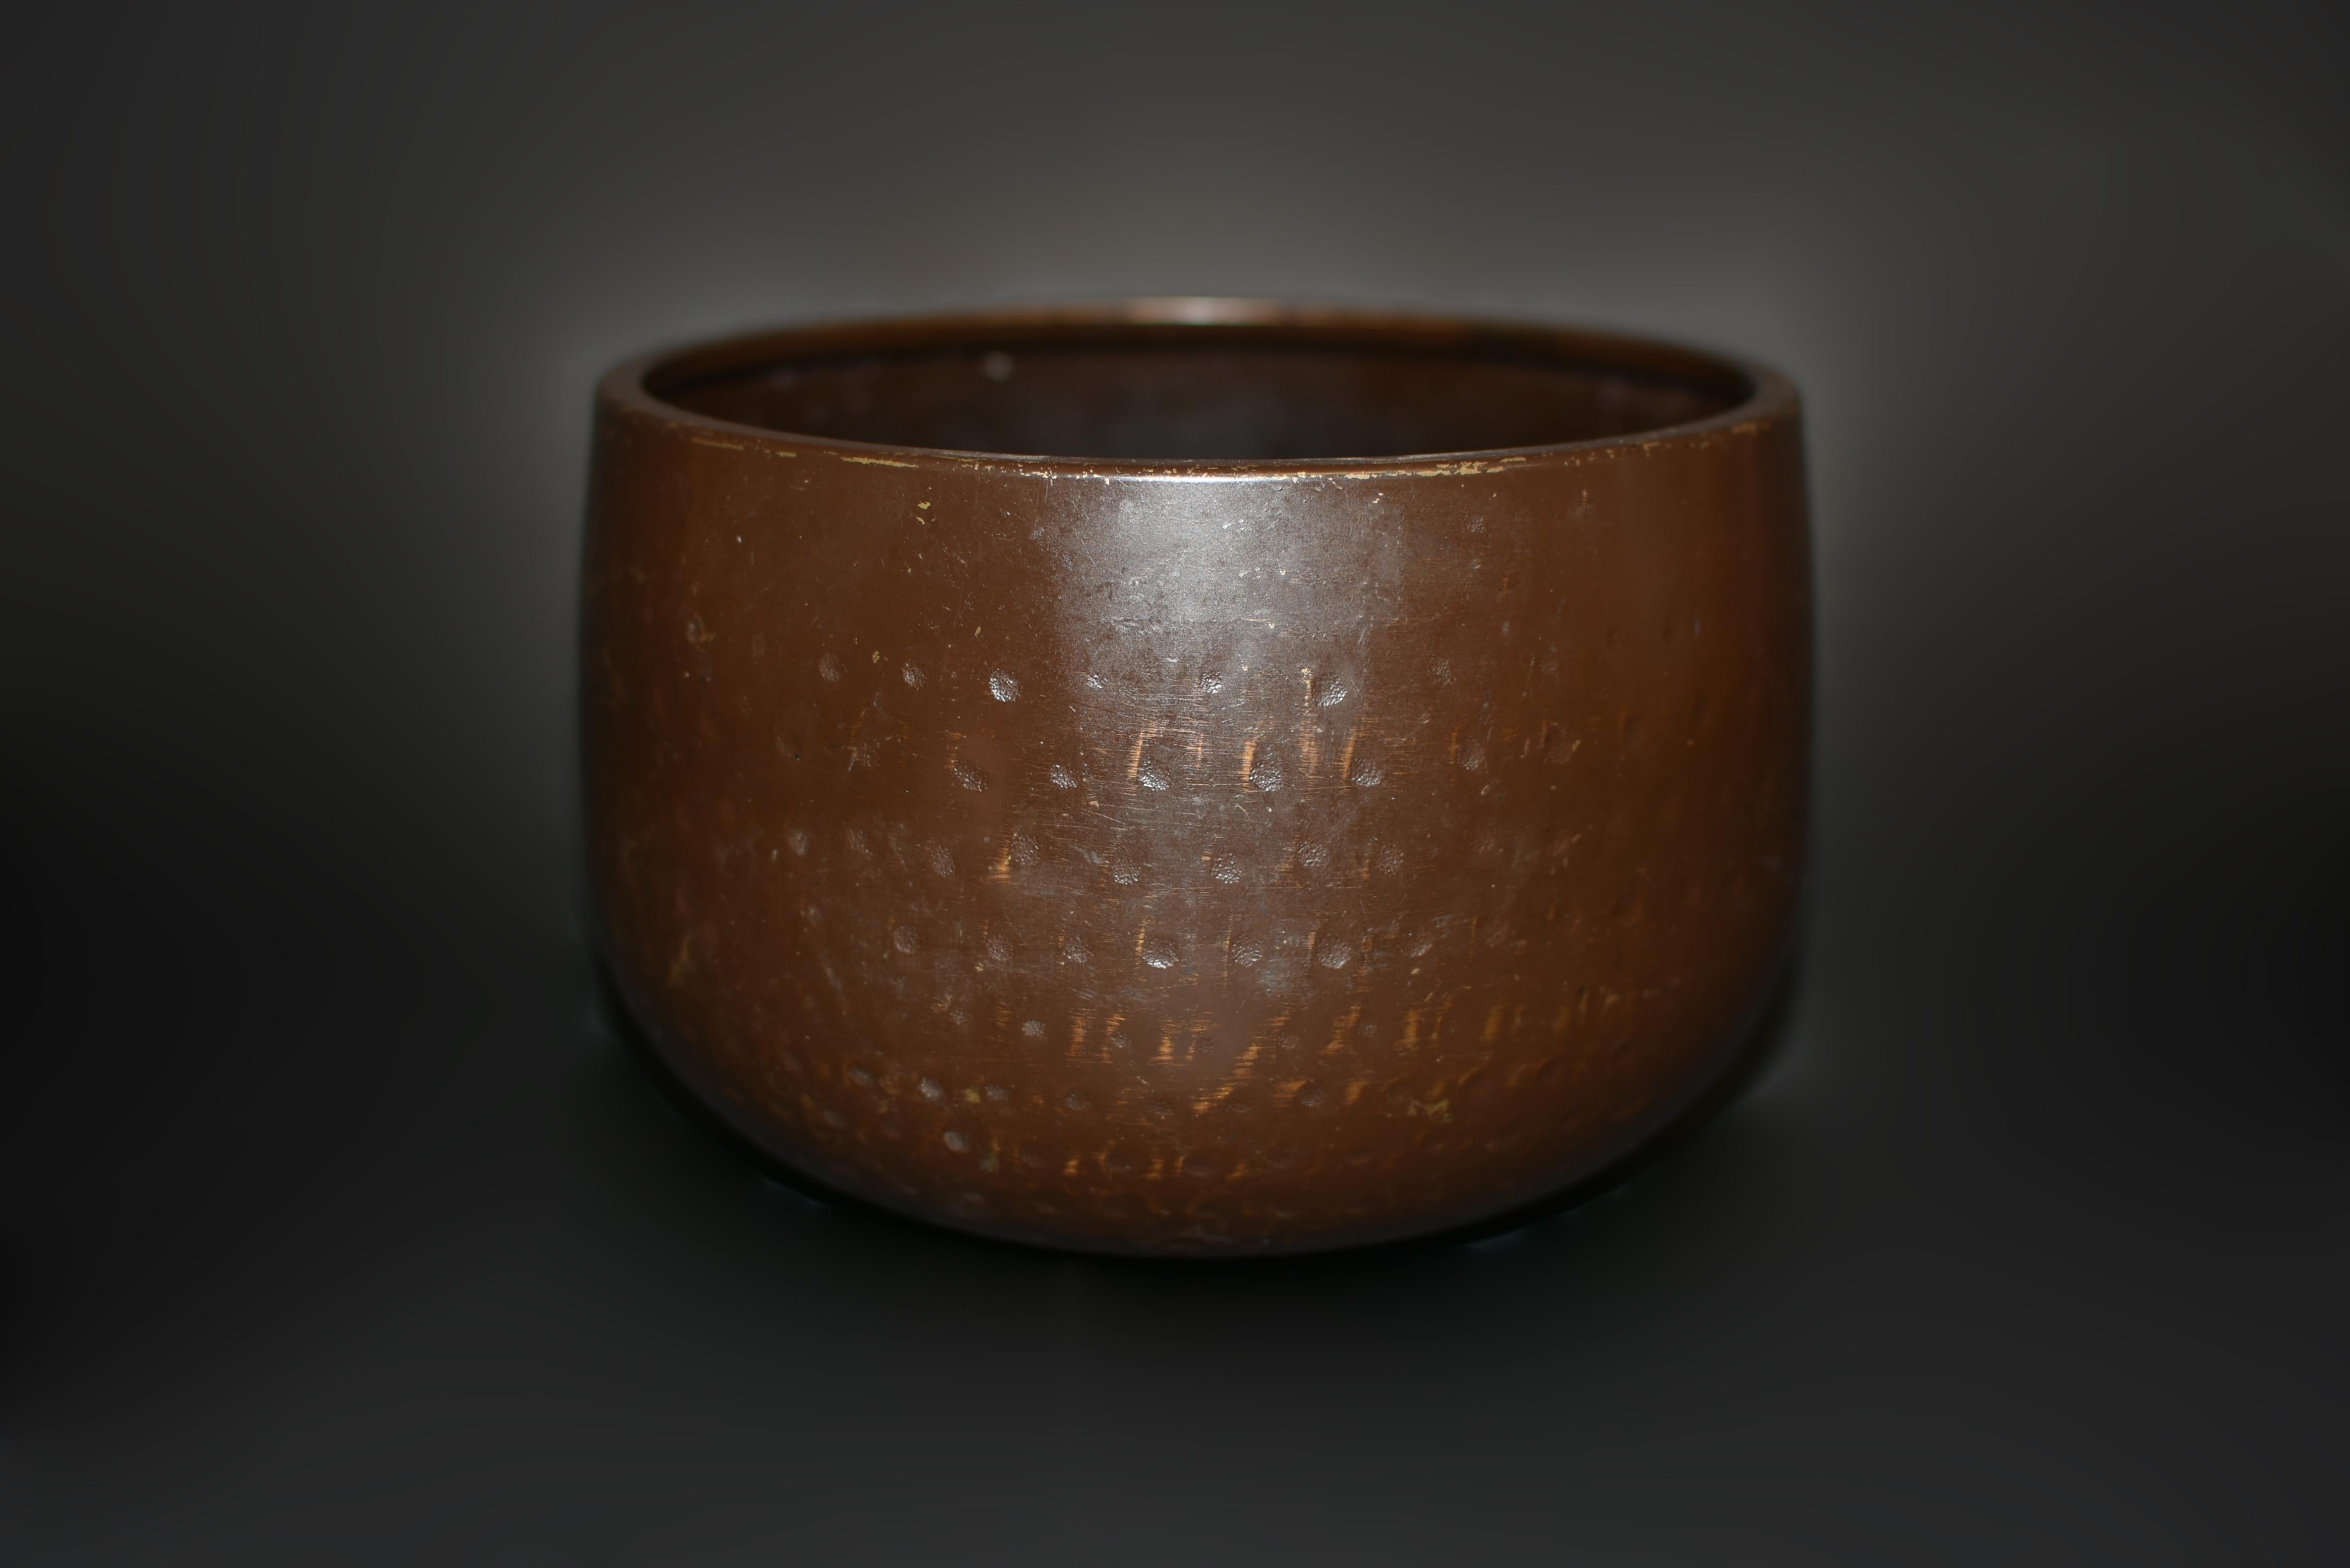 An unique antique Japanese singing bowl with beautiful brown earth colored exterior.  Crafted in solid bronze with hand hammered divots, the bowl embodies the classic Japanese aesthetics where beauty is found in nature, order and simplicity. Black